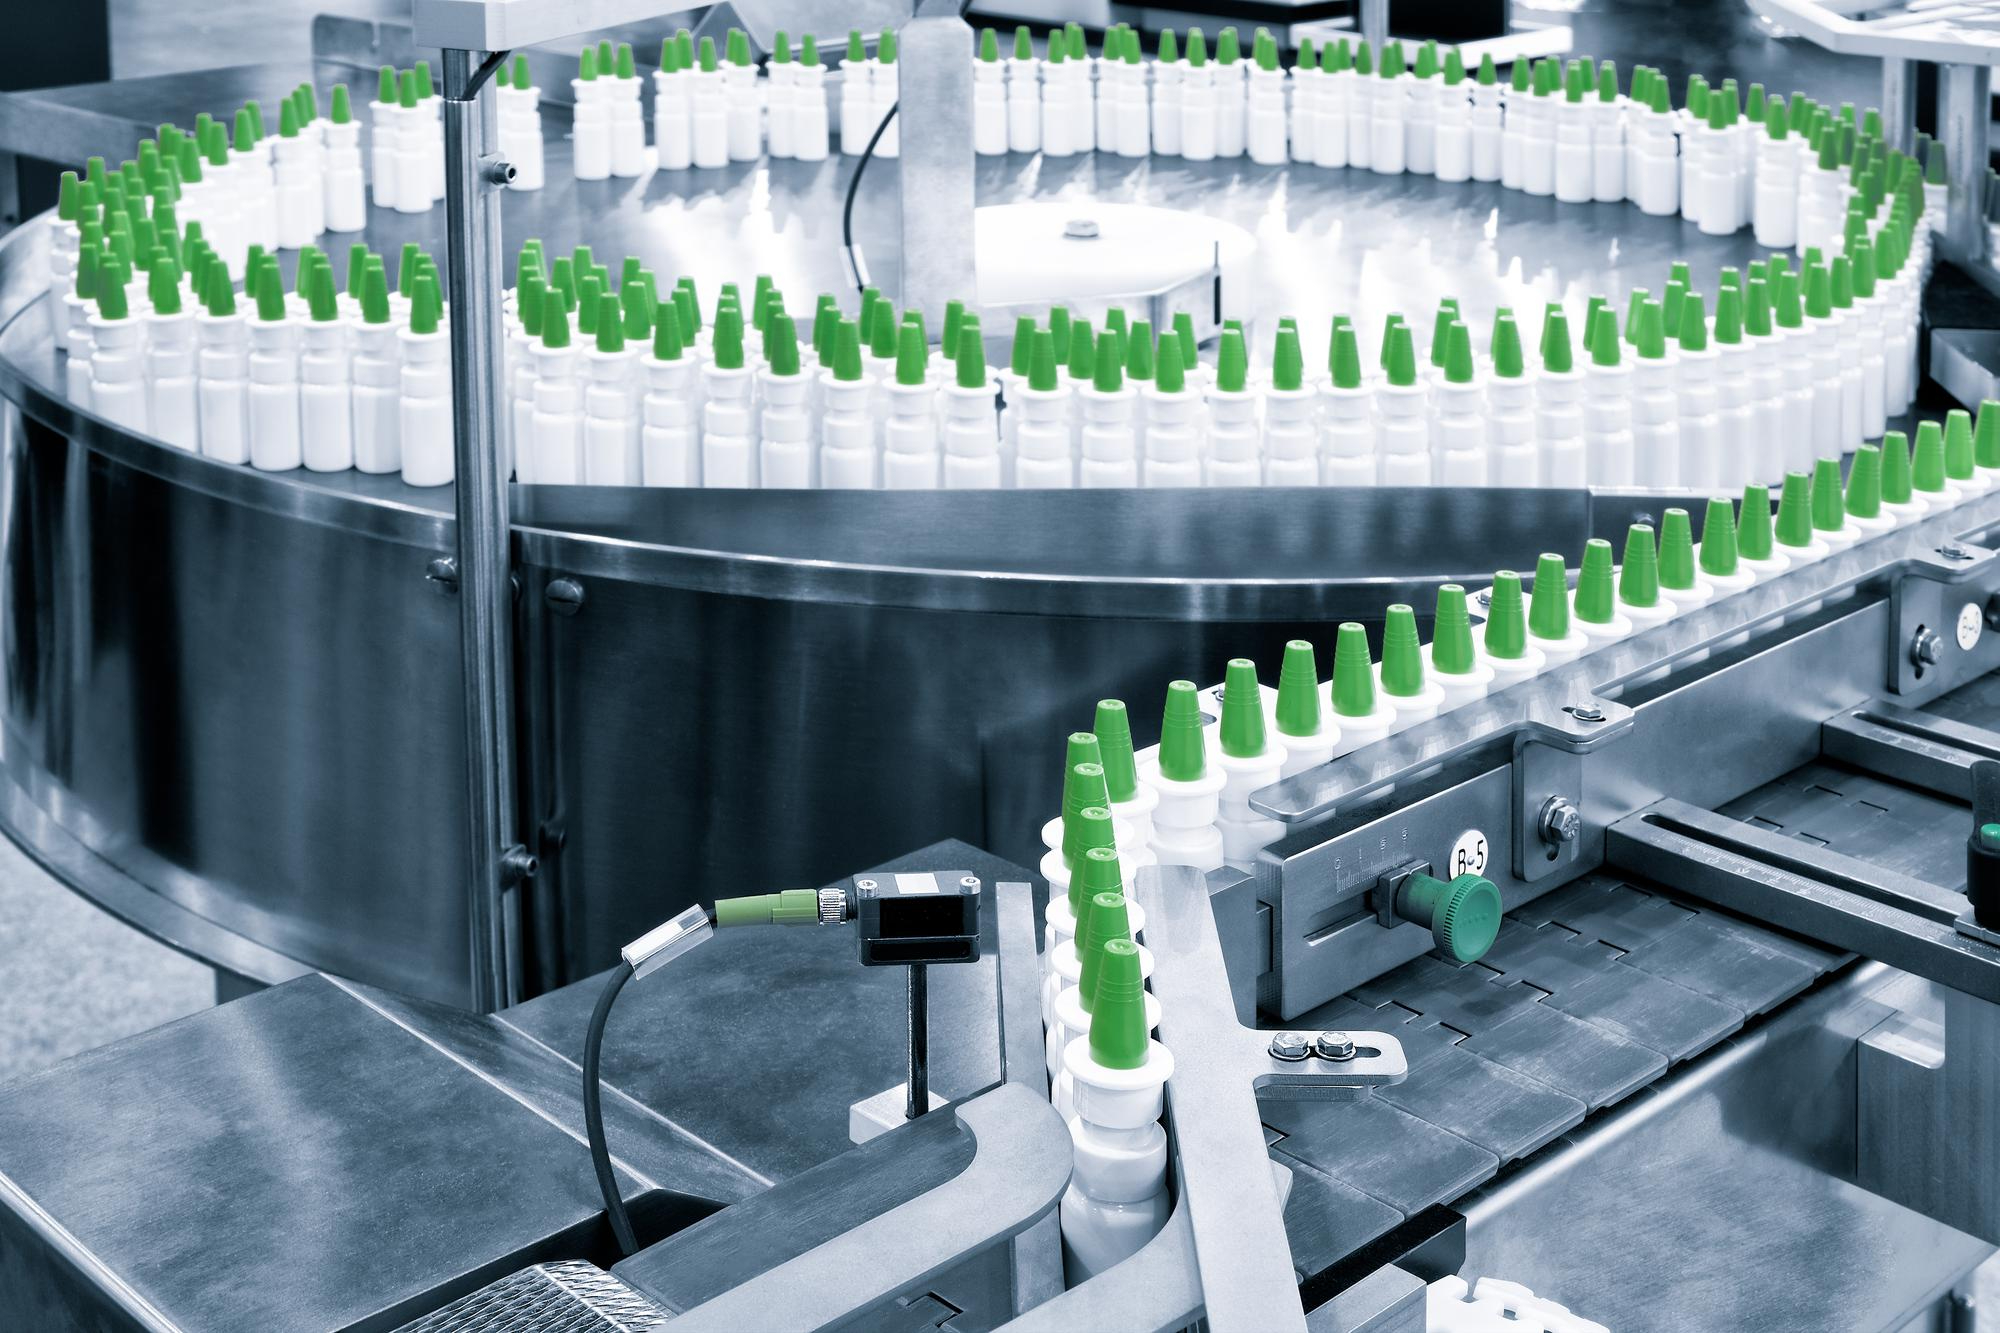 close-up-many-white-plastic-spray-bottles-for-packaging-liquid-medicines-or-cosmetics-in-row-on-conveyor-belt-in-pharmaceutical-manufacturing-factory